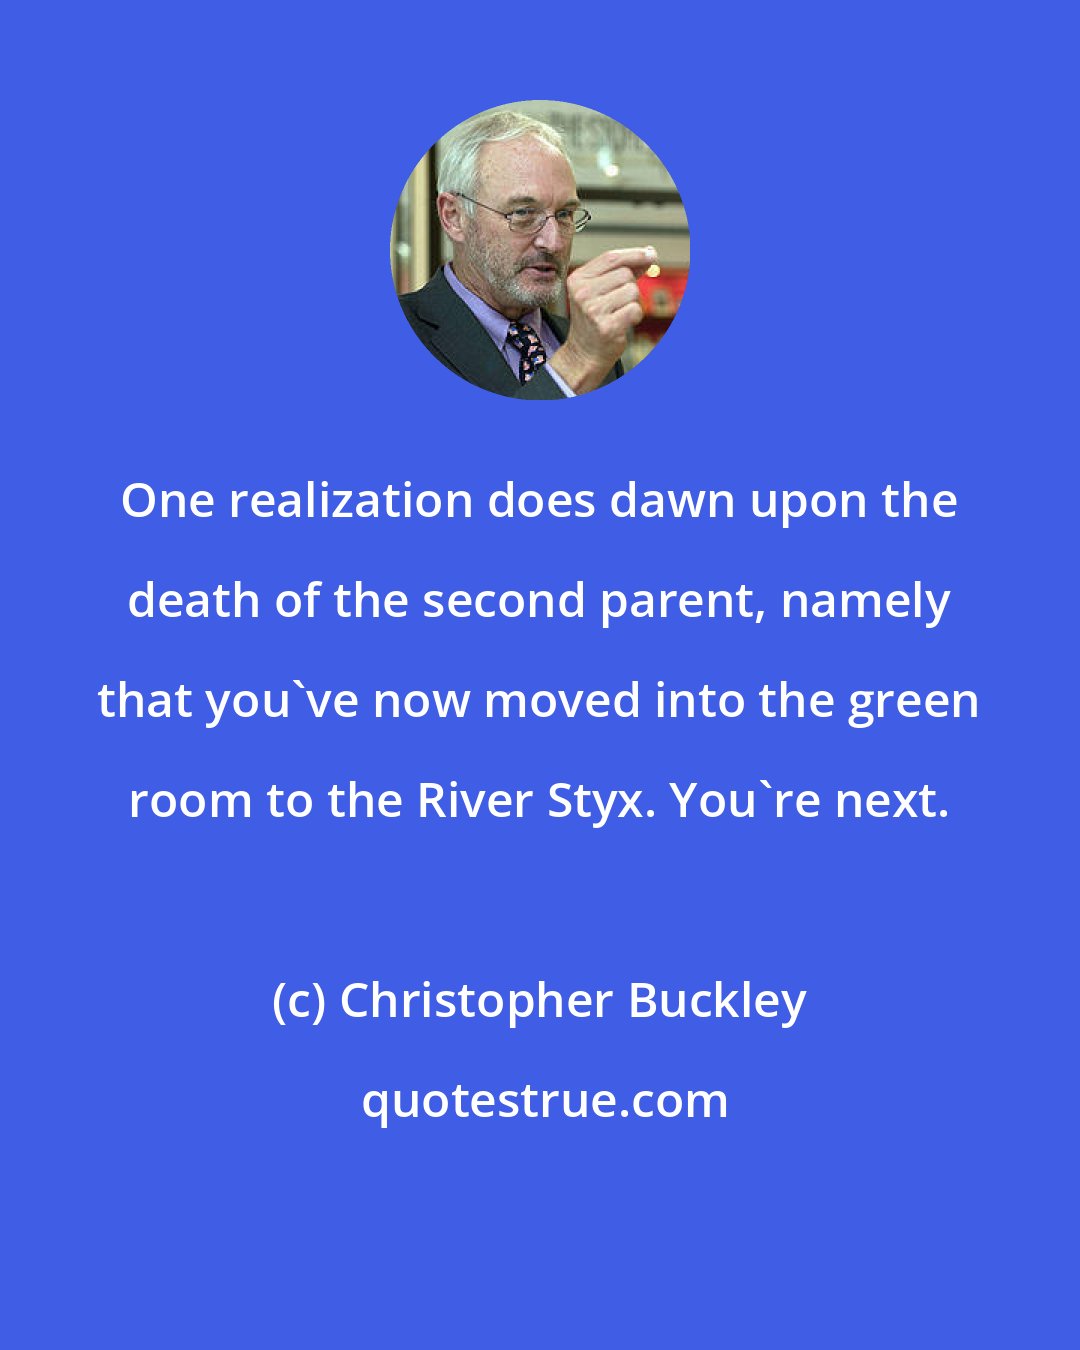 Christopher Buckley: One realization does dawn upon the death of the second parent, namely that you've now moved into the green room to the River Styx. You're next.